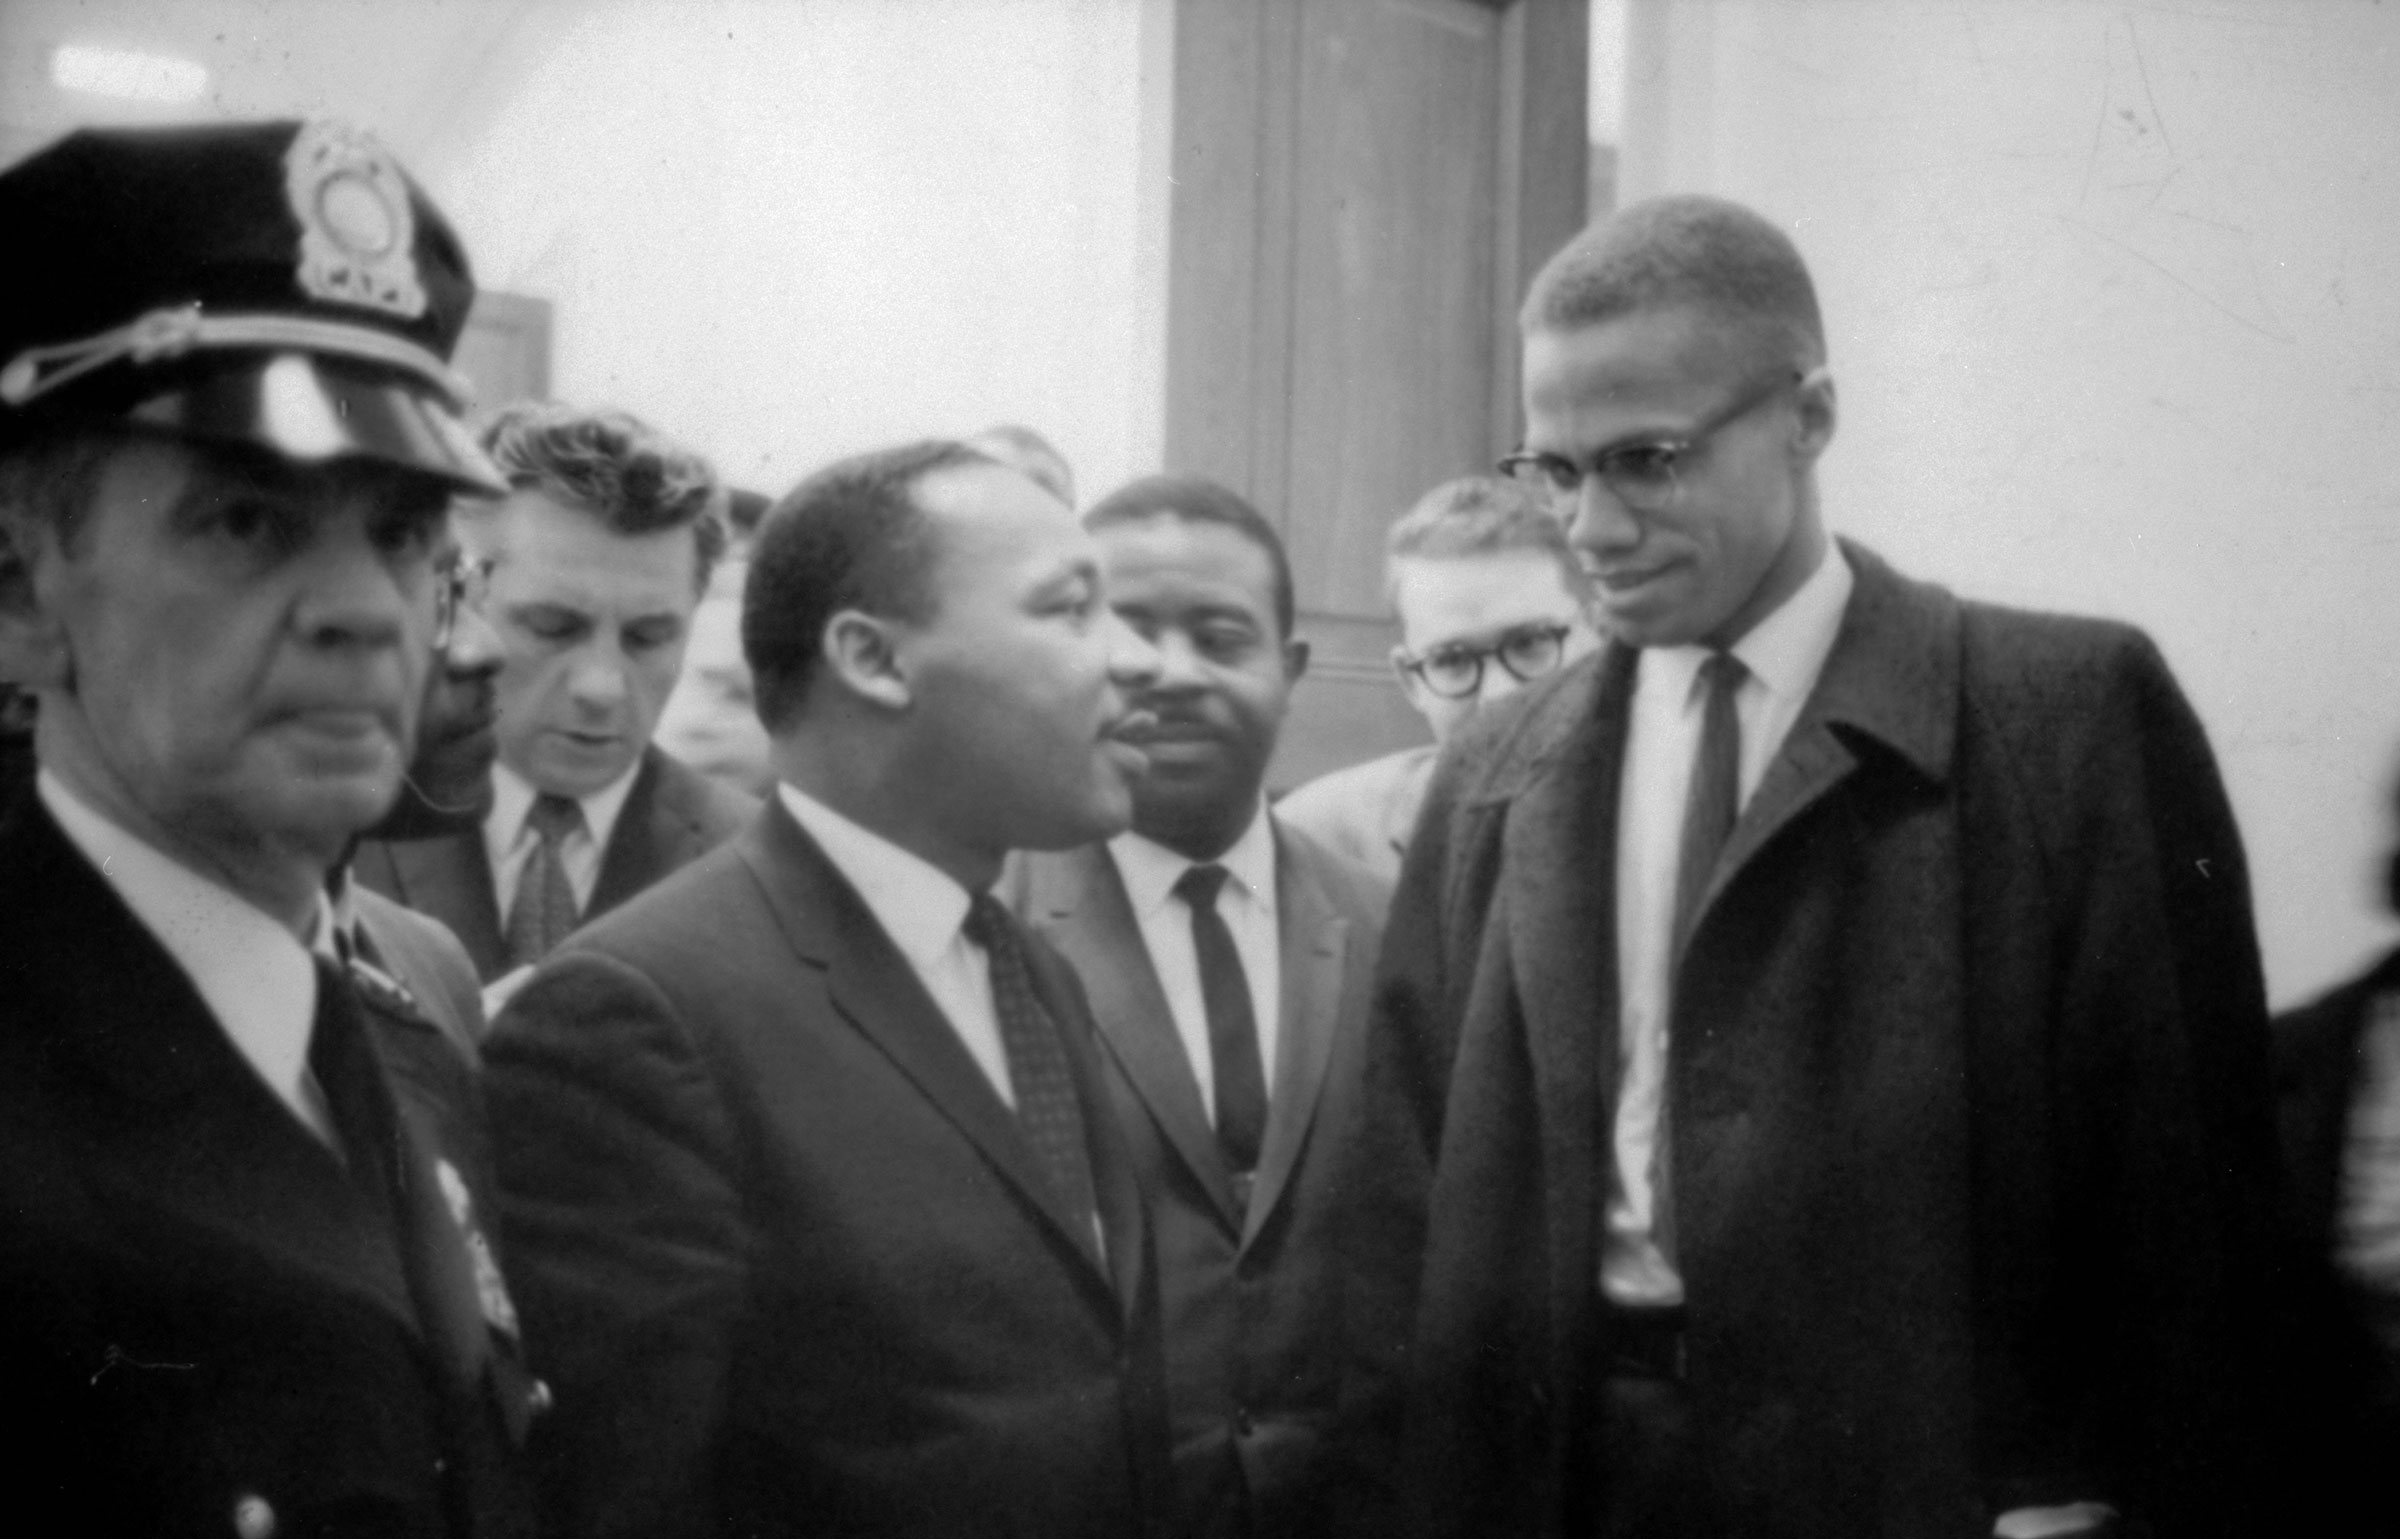 Martin Luther King Jr. and Malcolm X waiting for a press conference, on March 26, 1964.